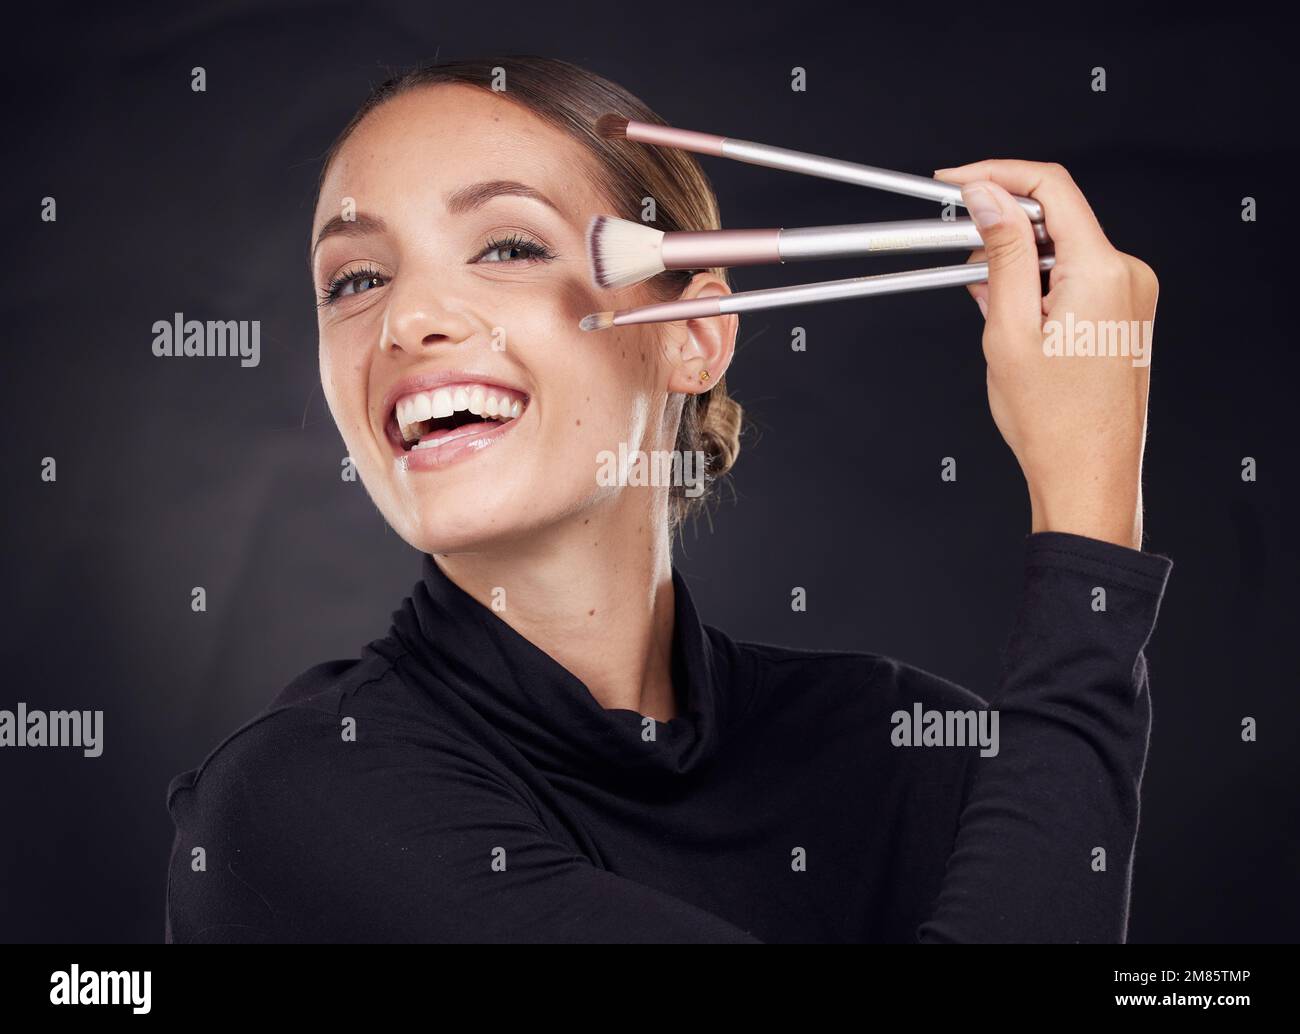 Beautiful teen girl holding makeup brushes Stock Photo by ©stockyimages  27657527